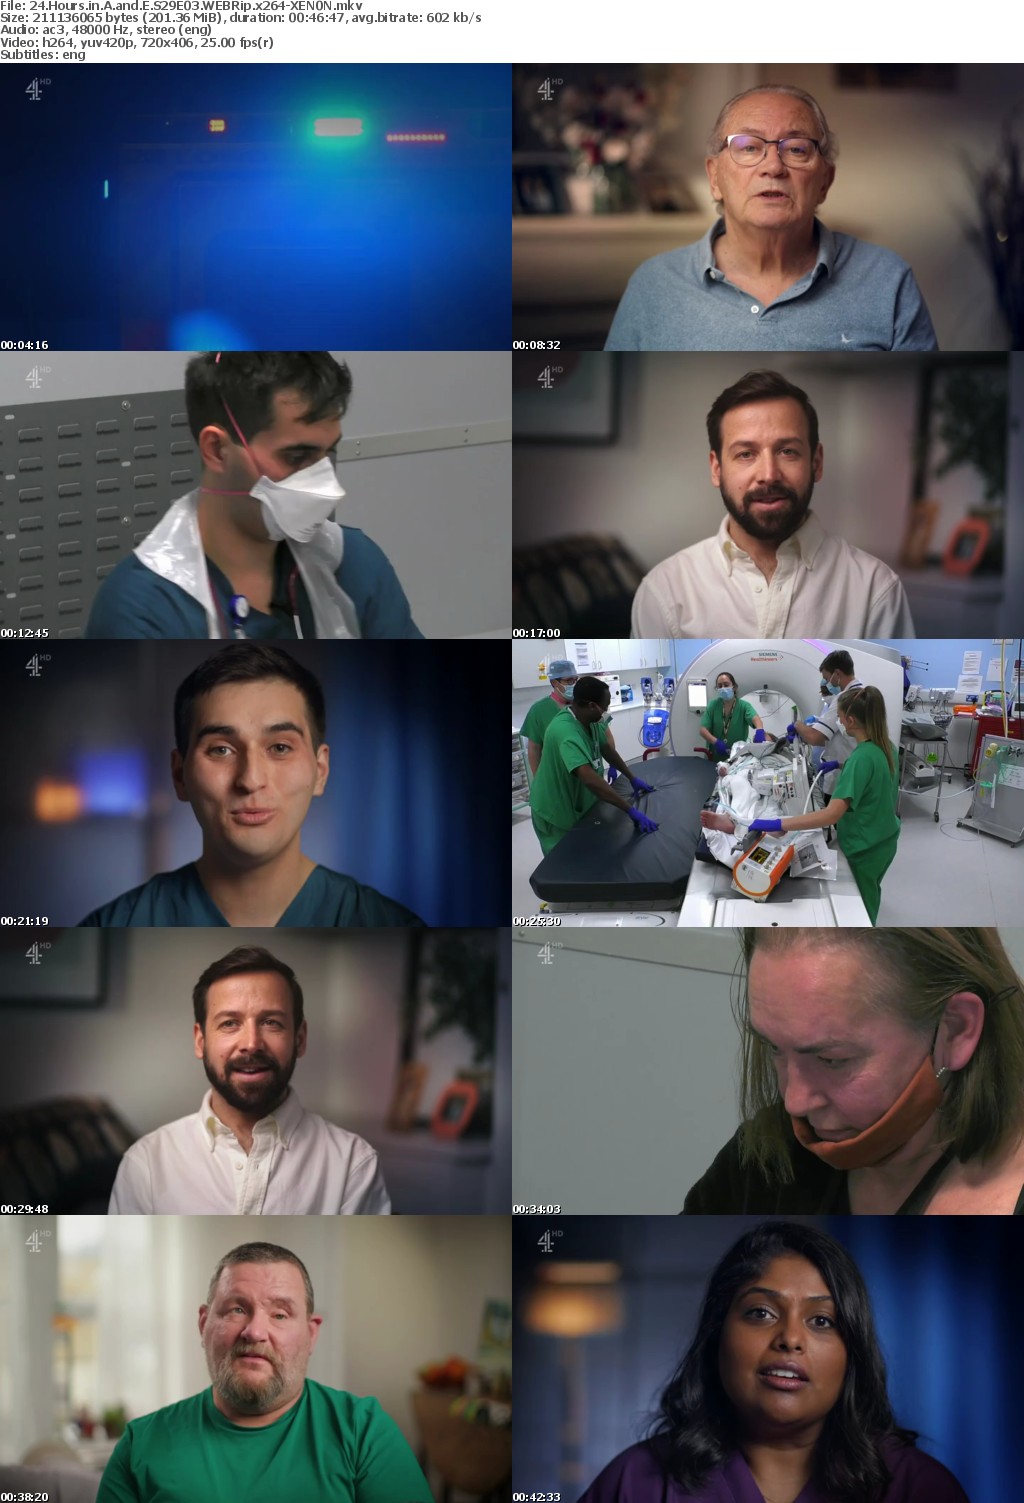 24 Hours in A and E S29E03 WEBRip x264-XEN0N